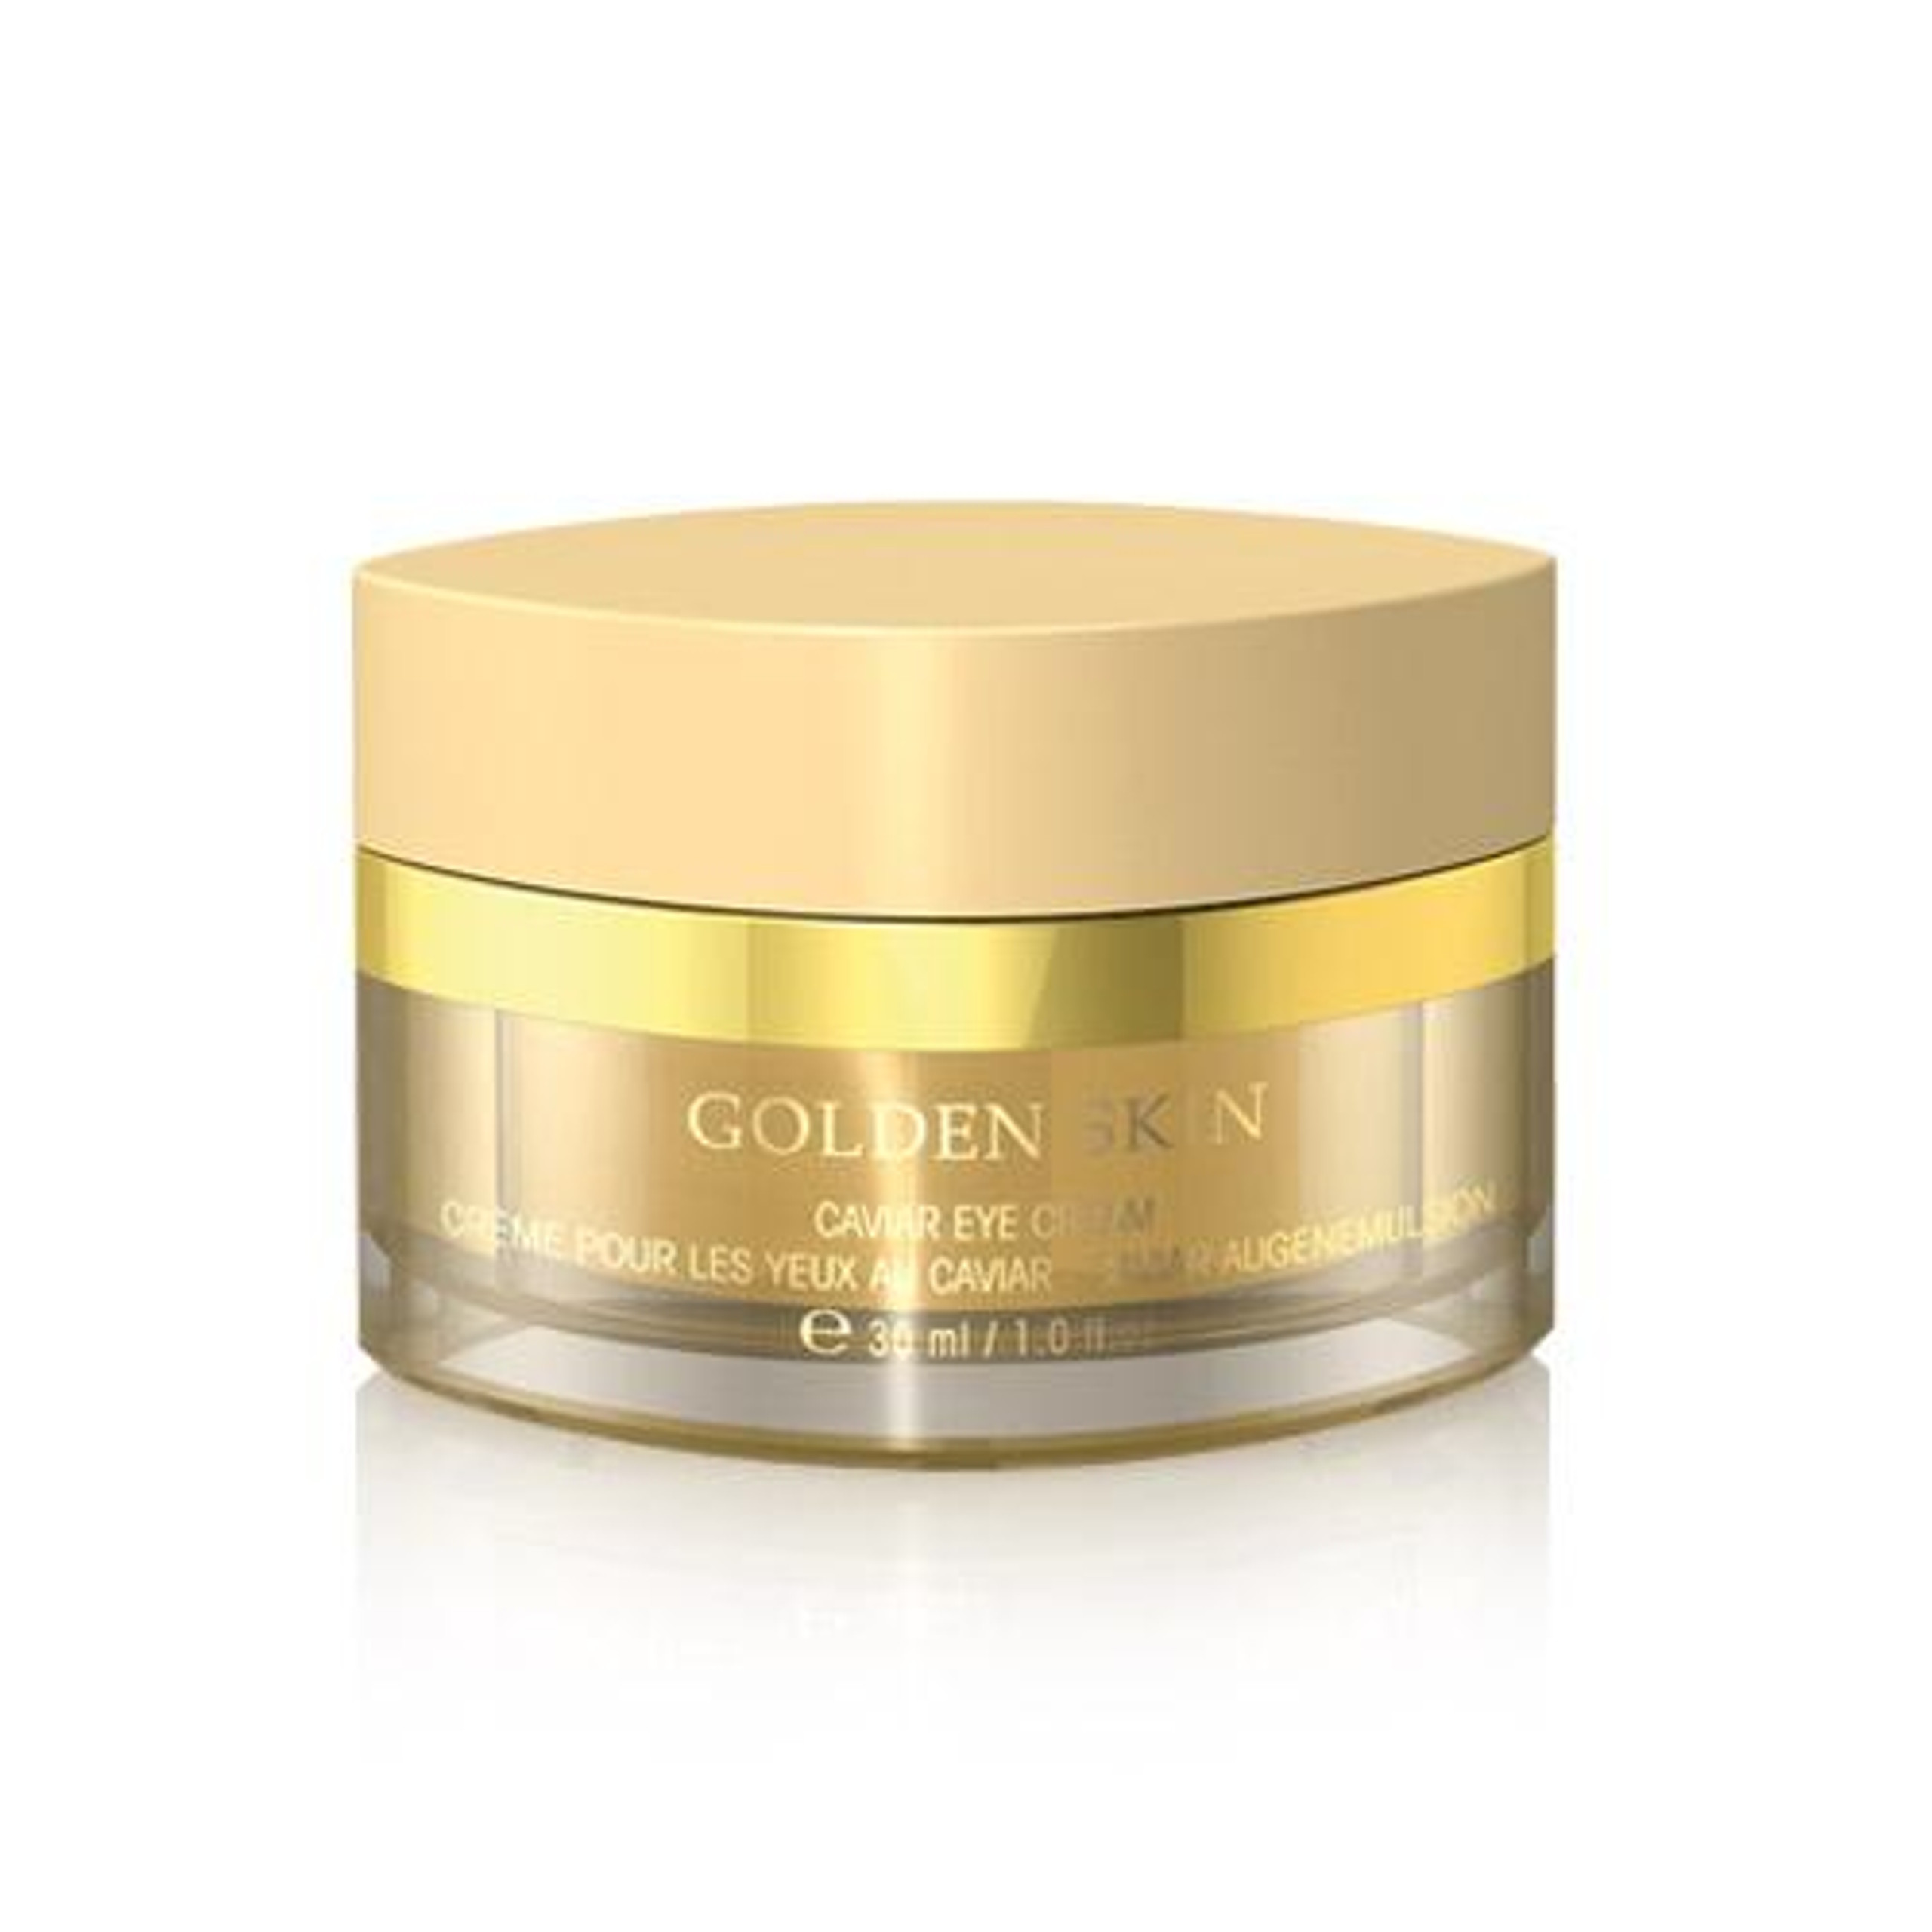 Golden Skin, Gold And Caviar Luxury Skin Care - Être Belle